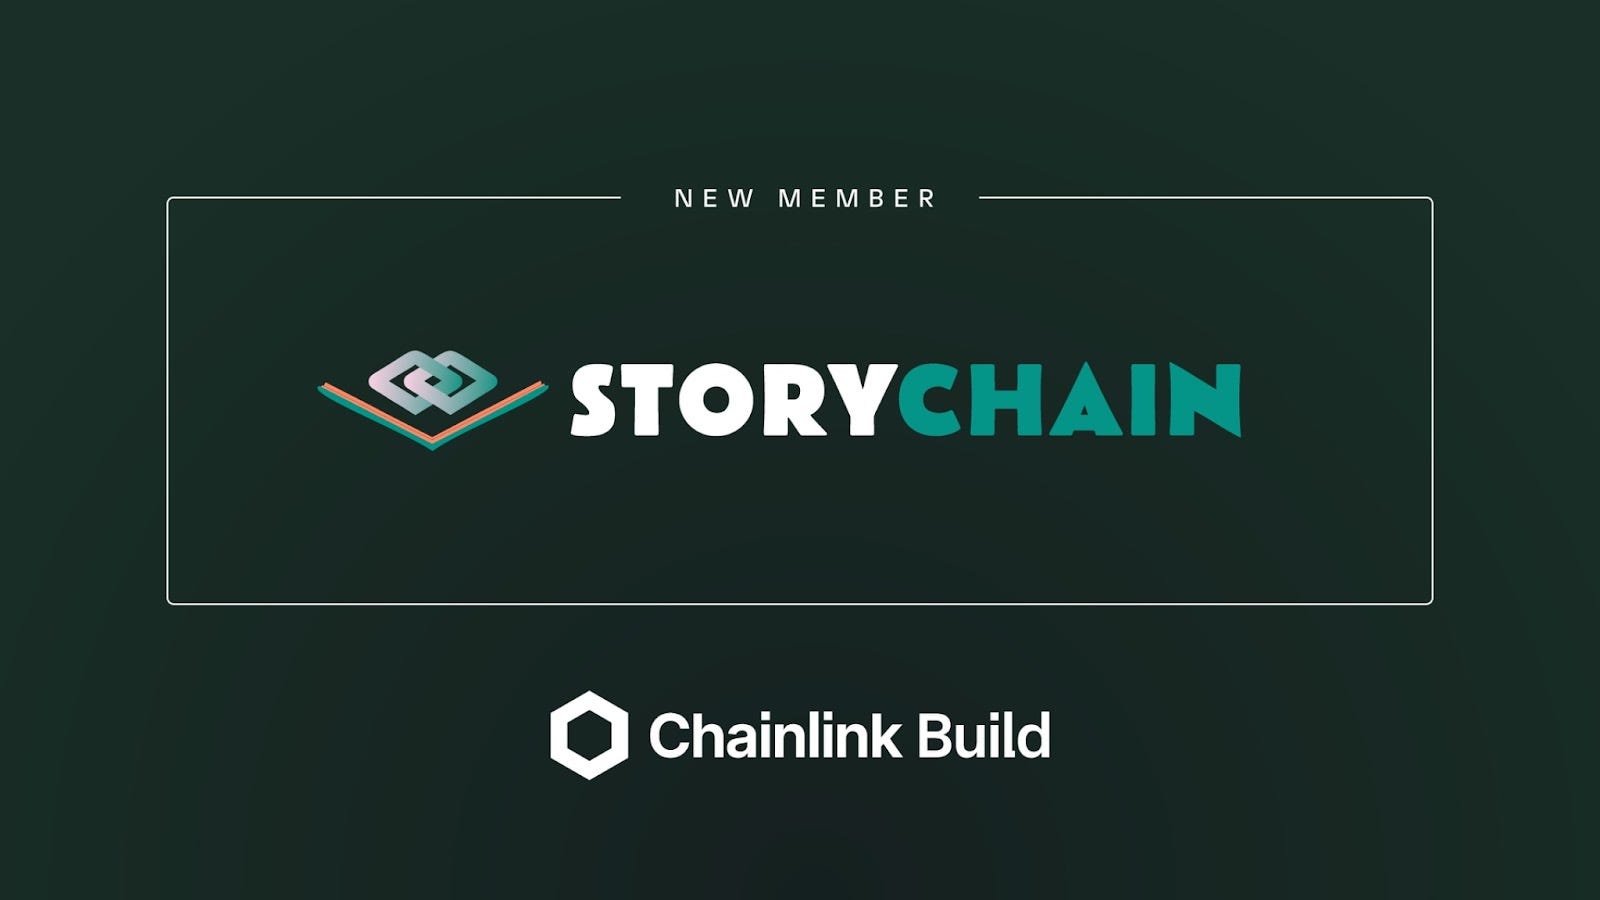 StoryChain joins Chainlink BUILD